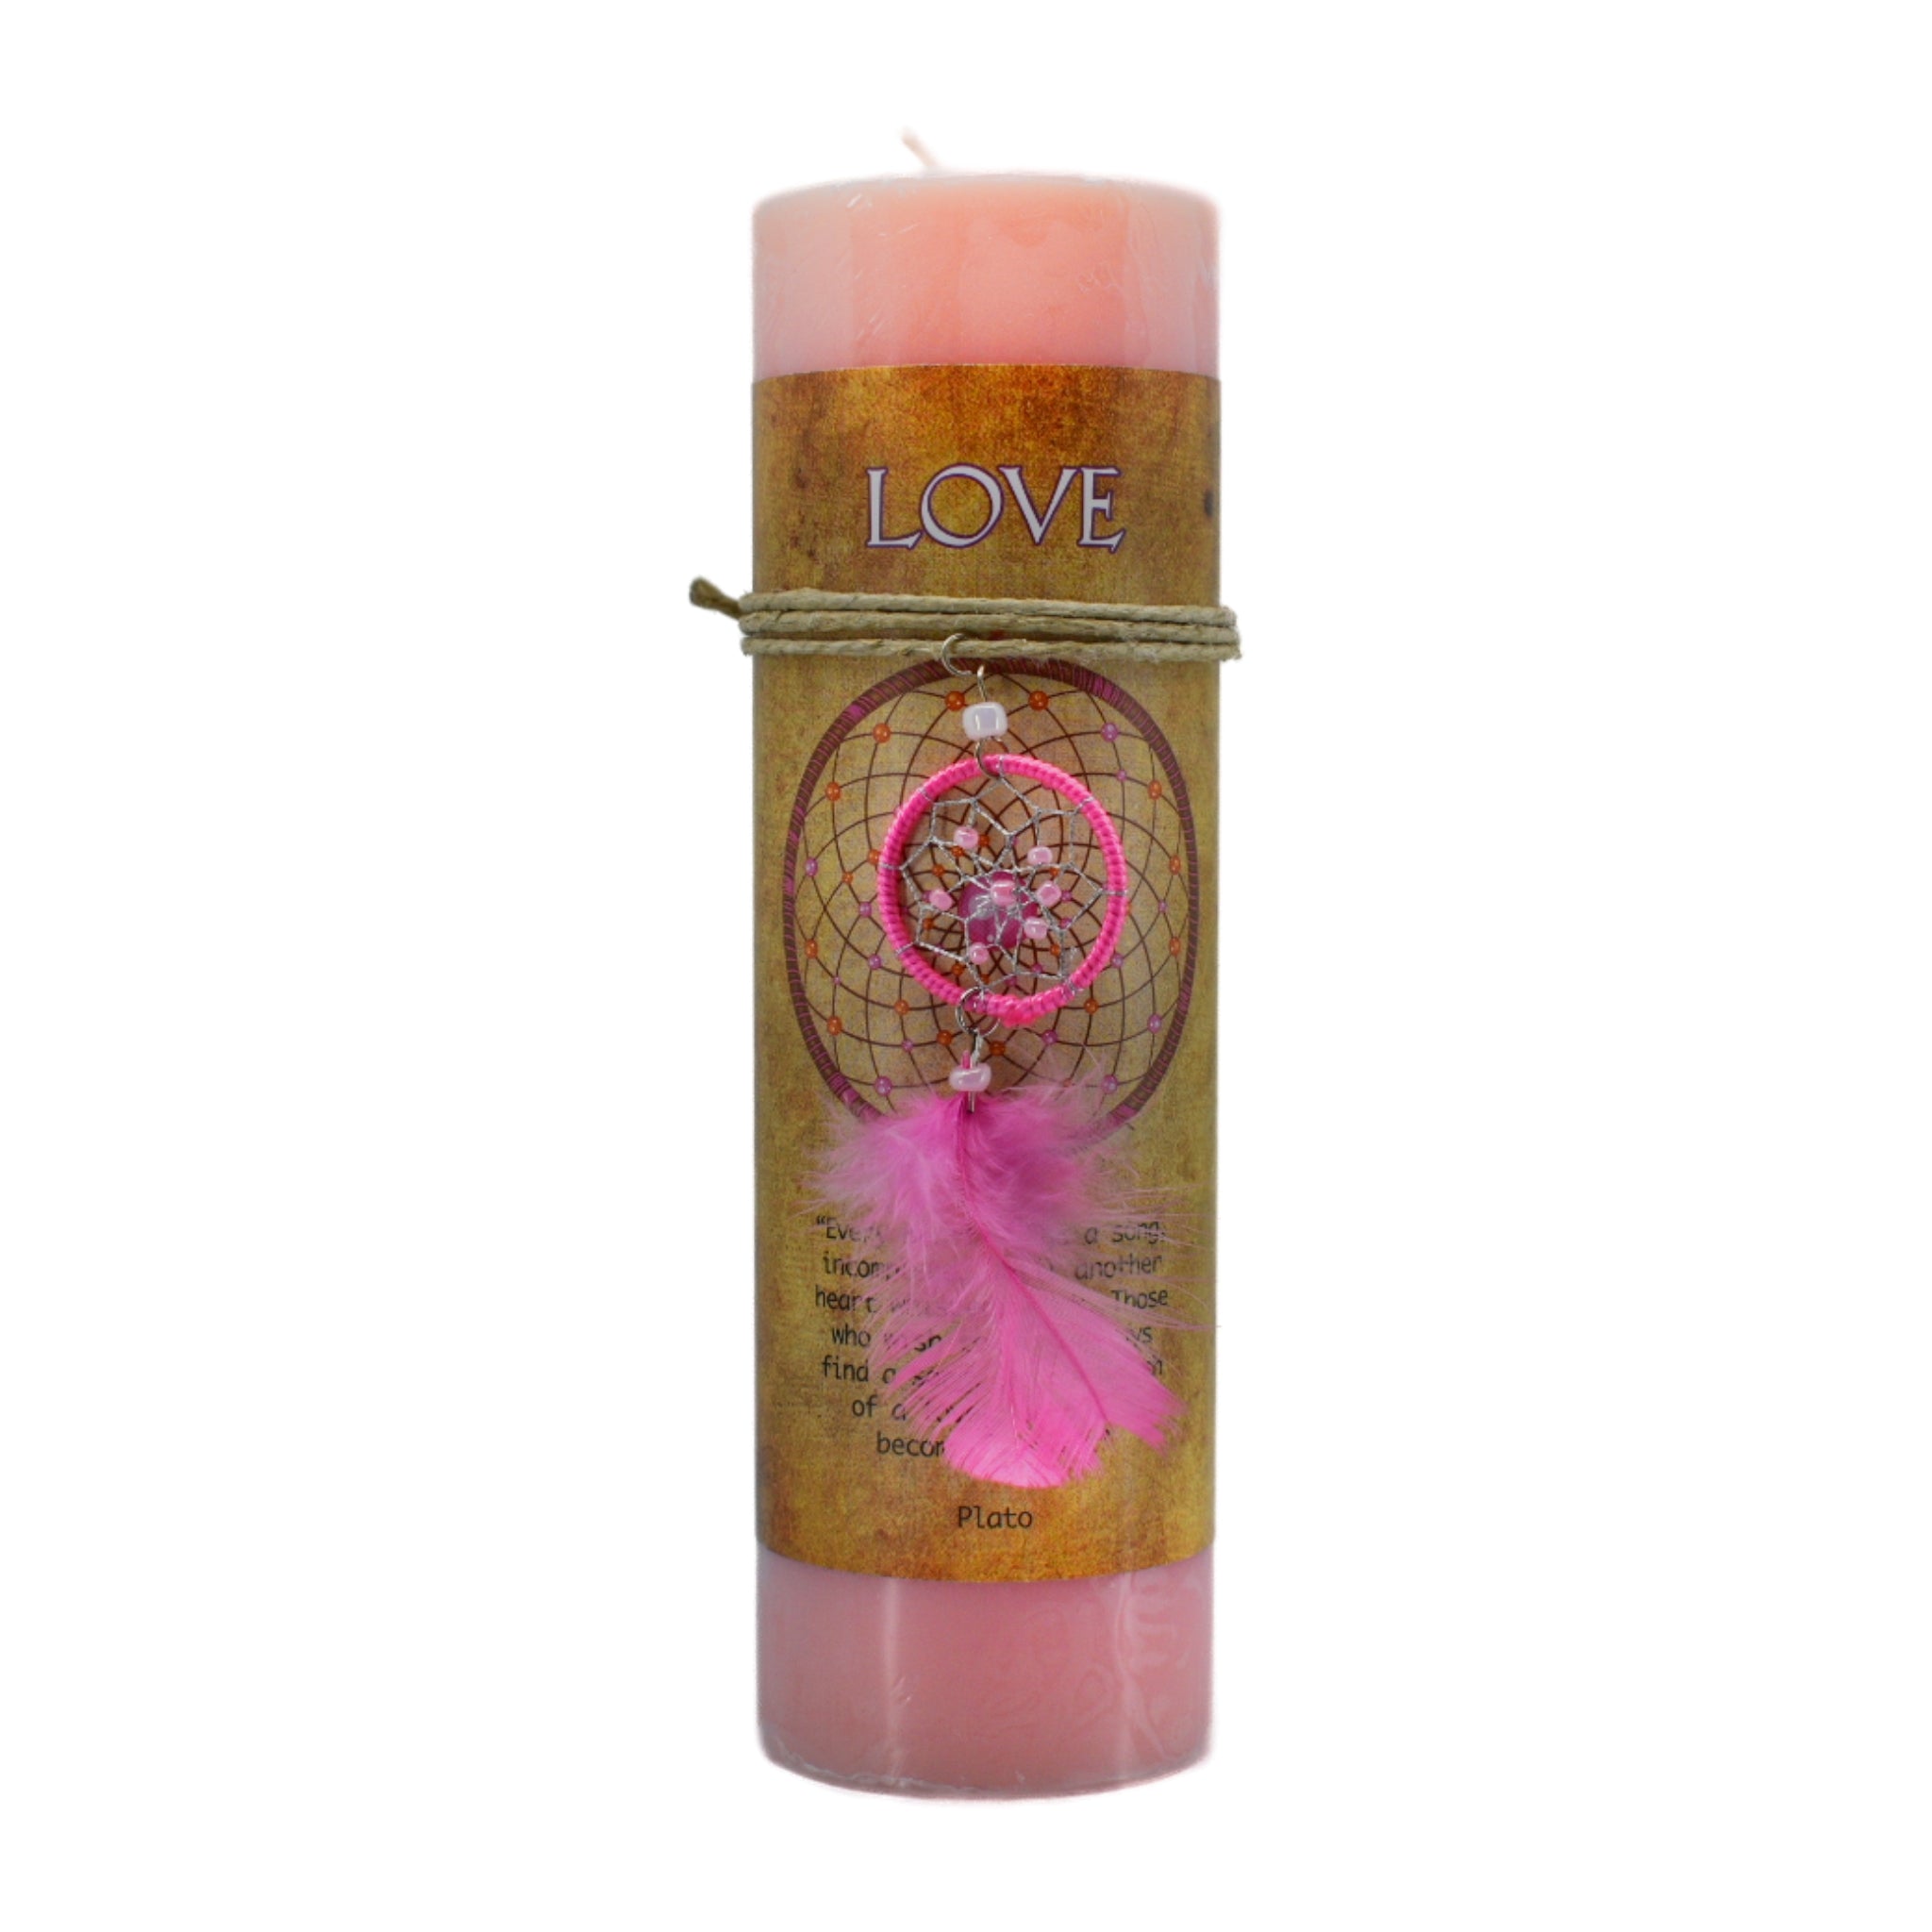 Love Dream Catcher Candle.  Dream catcher is pink with a pink feather.  Light the candle to bring in the intention of love.  Candle is pink.